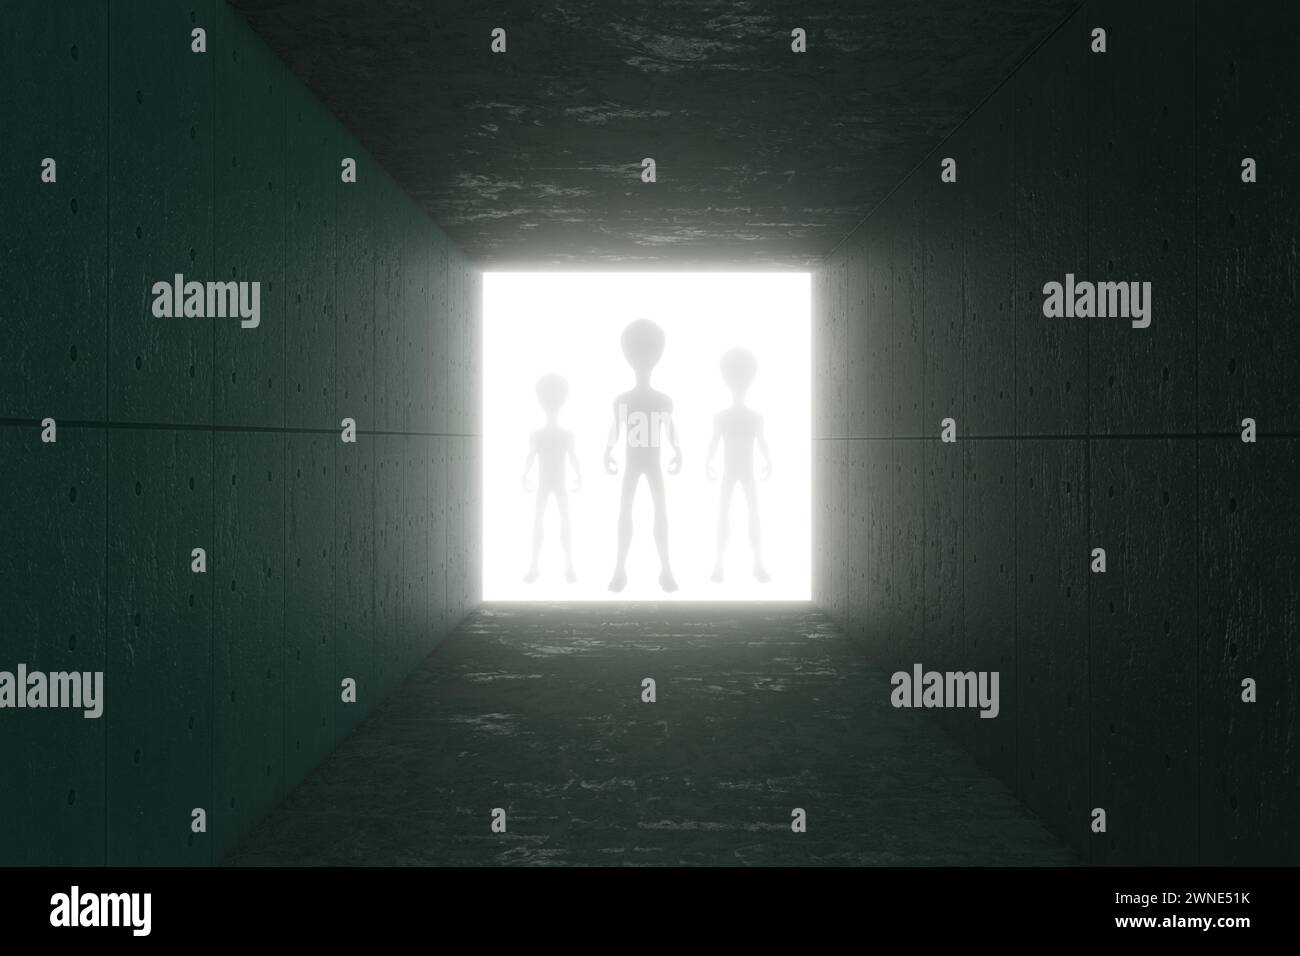 Silhouettes of aliens standing at the end of a tunnel made of concrete plates. Illustration of the concept of extraterrestrial life and creatures Stock Photo